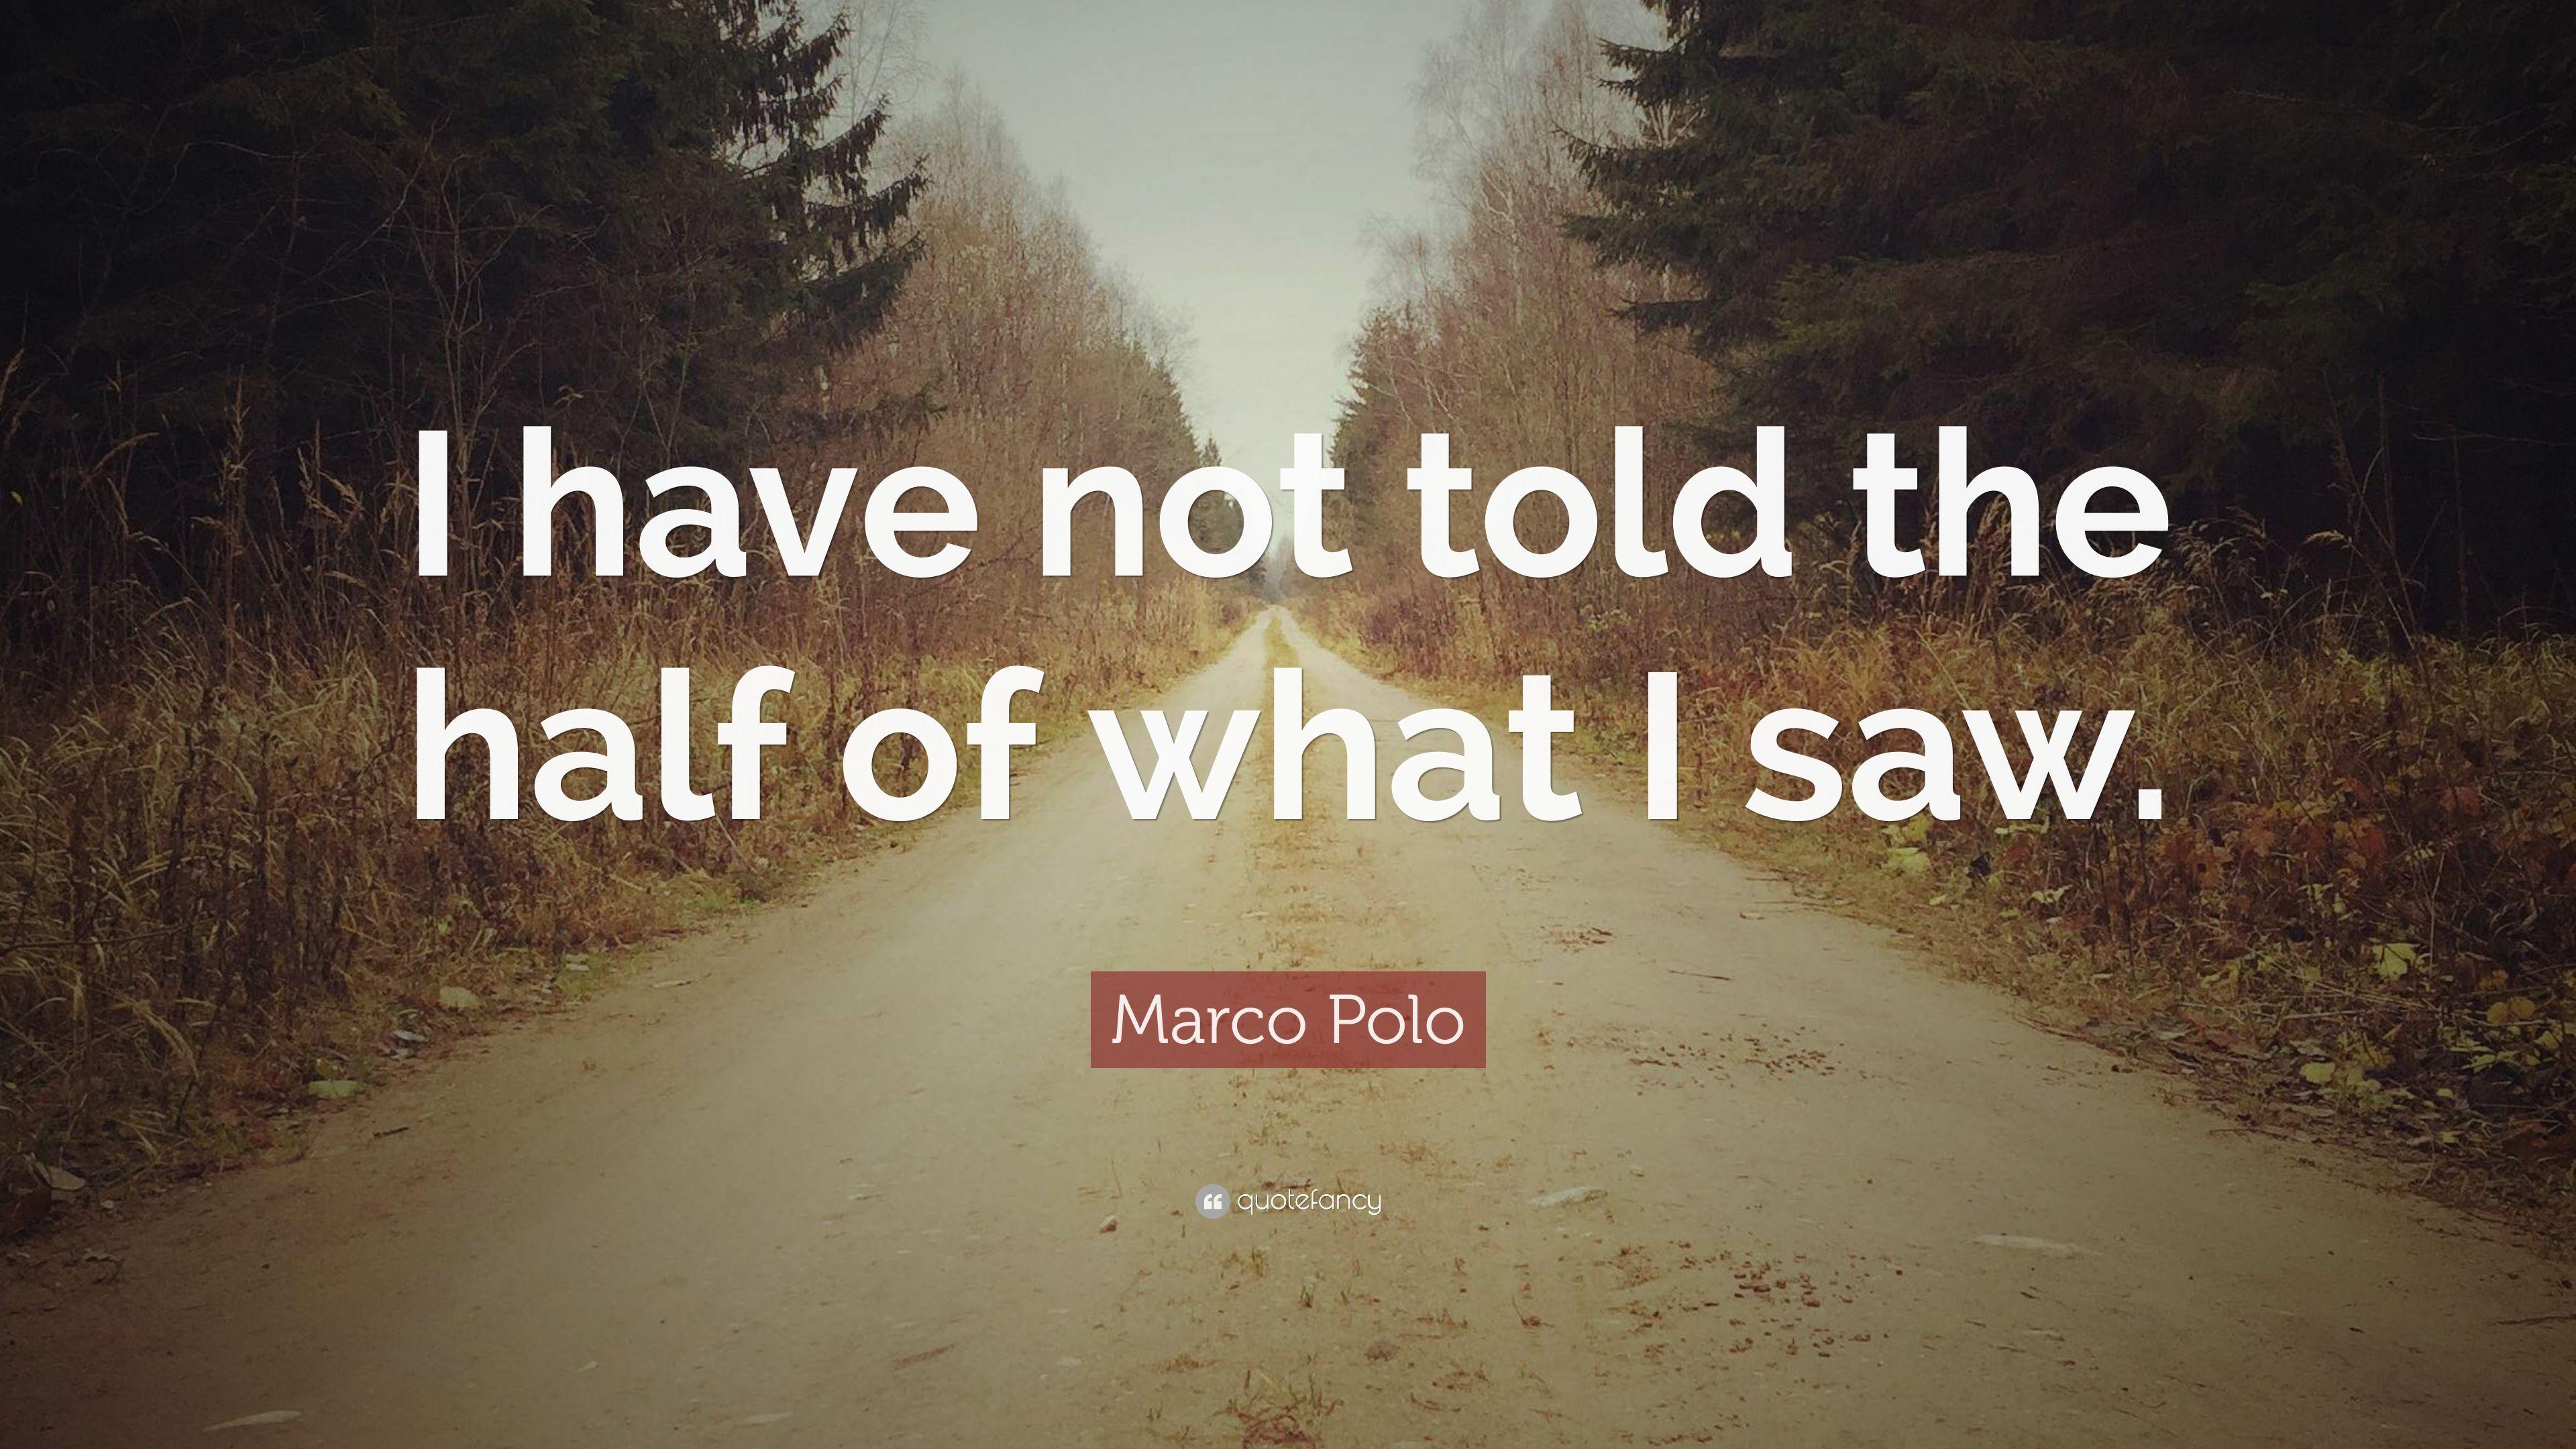 Marco Polo Quote: “I have not told the half of what I saw.” 9